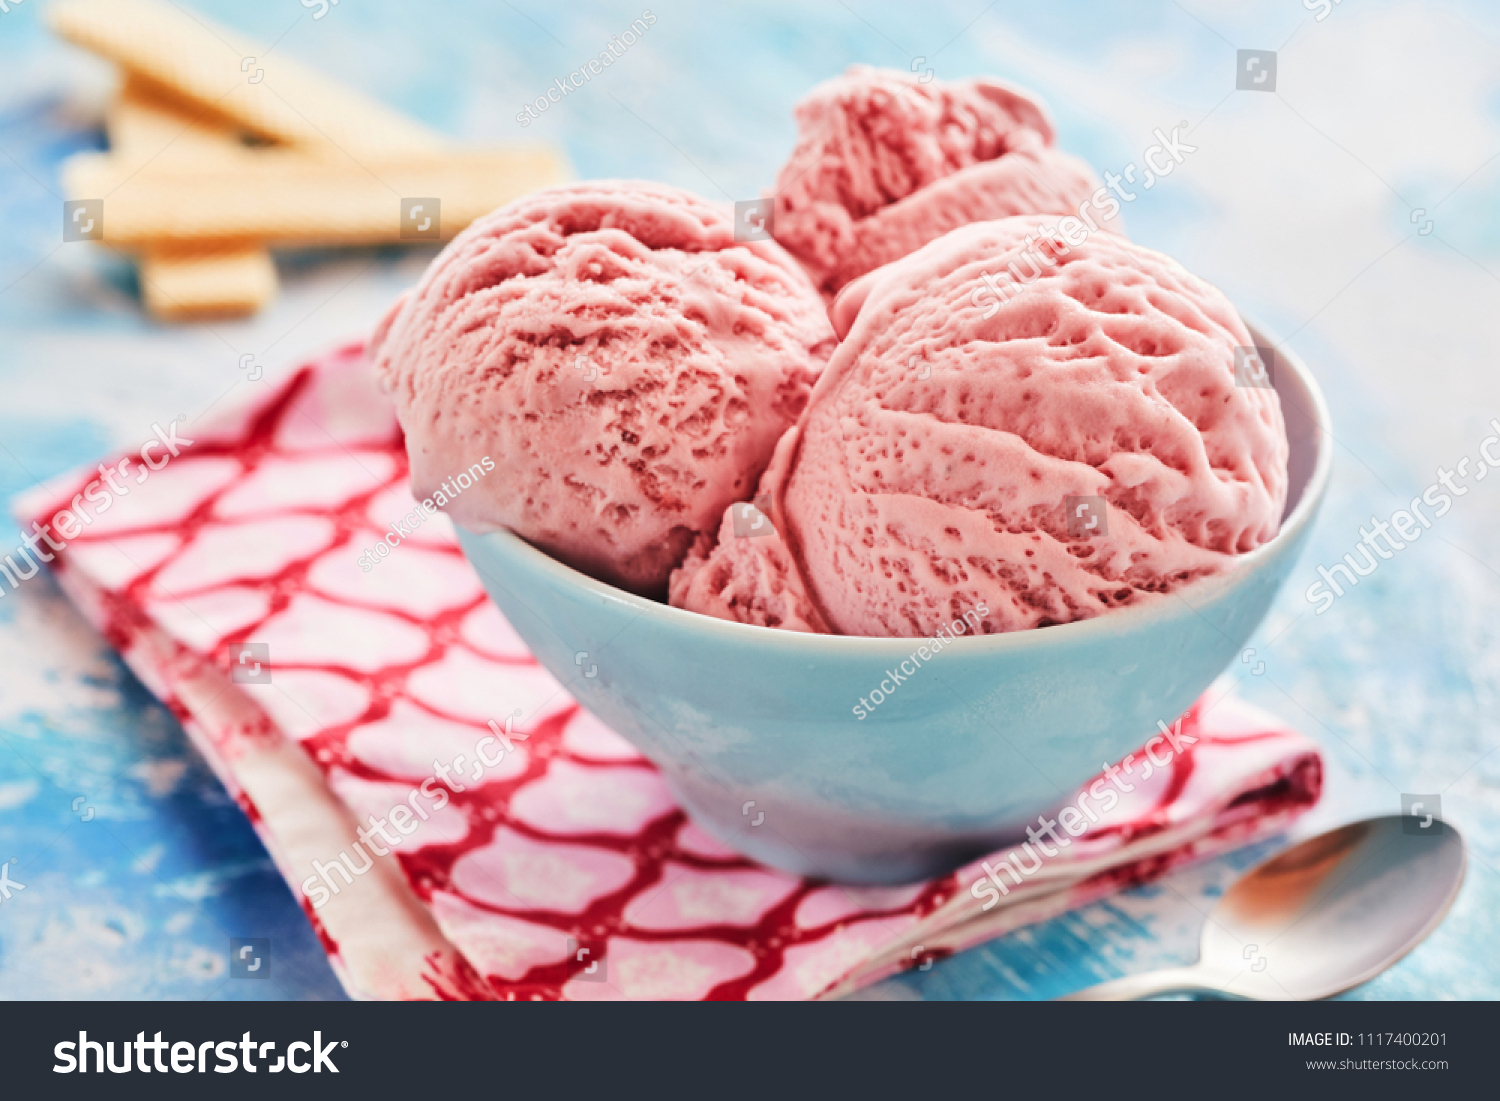 Creamy scoops Italian strawberry gelato or ice cream served in a blue bowl for a delicious refreshing summer dessert in a close up view #1117400201